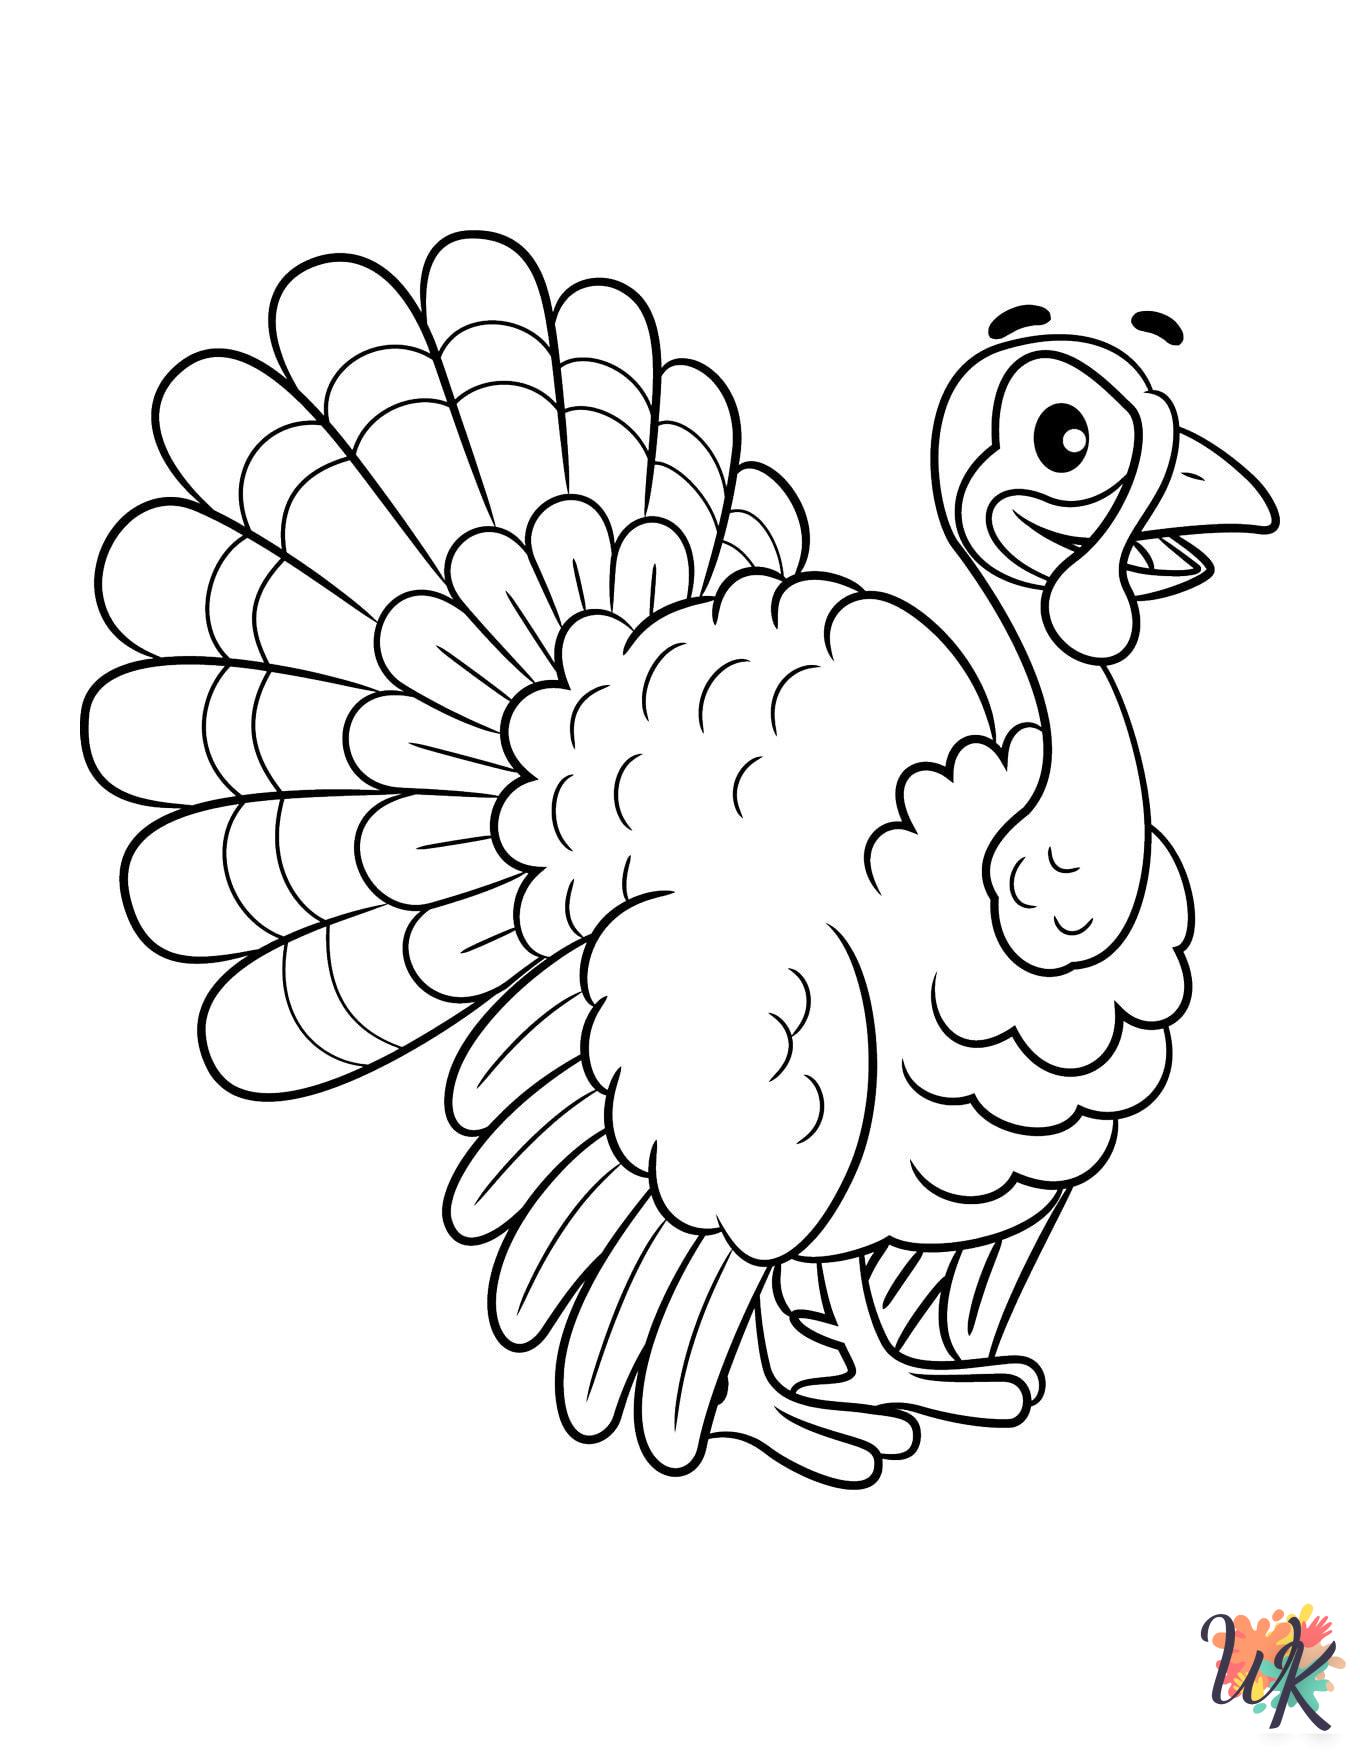 hard Turkey coloring pages